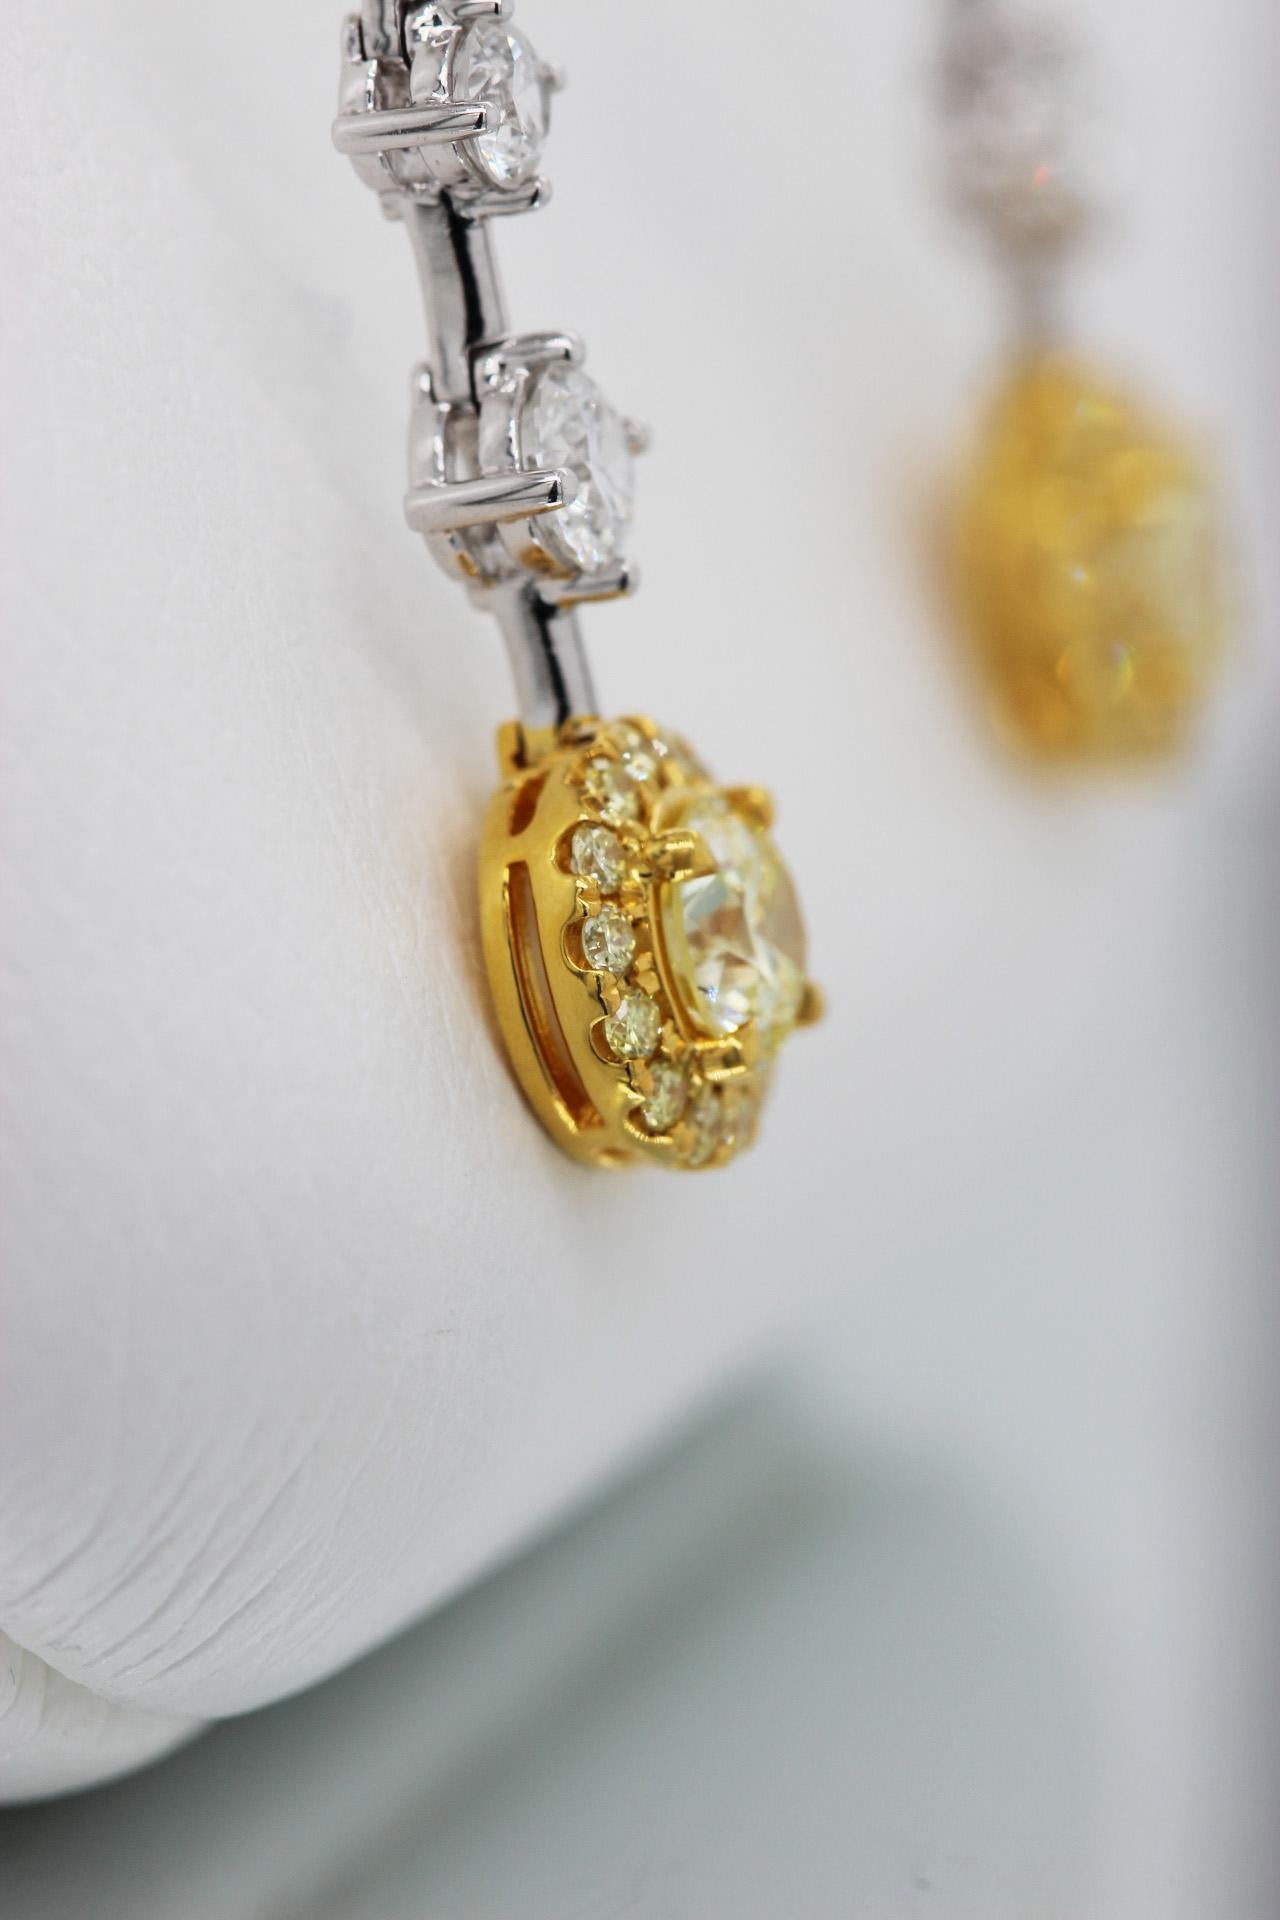 A pair of graduated diamond dangle earrings with GIA-certified natural fancy yellow diamond center stones on 18k white gold. Dangle earrings made with white gold and graduated white round brilliant diamonds (F, 2.43 TCW) and round yellow diamond